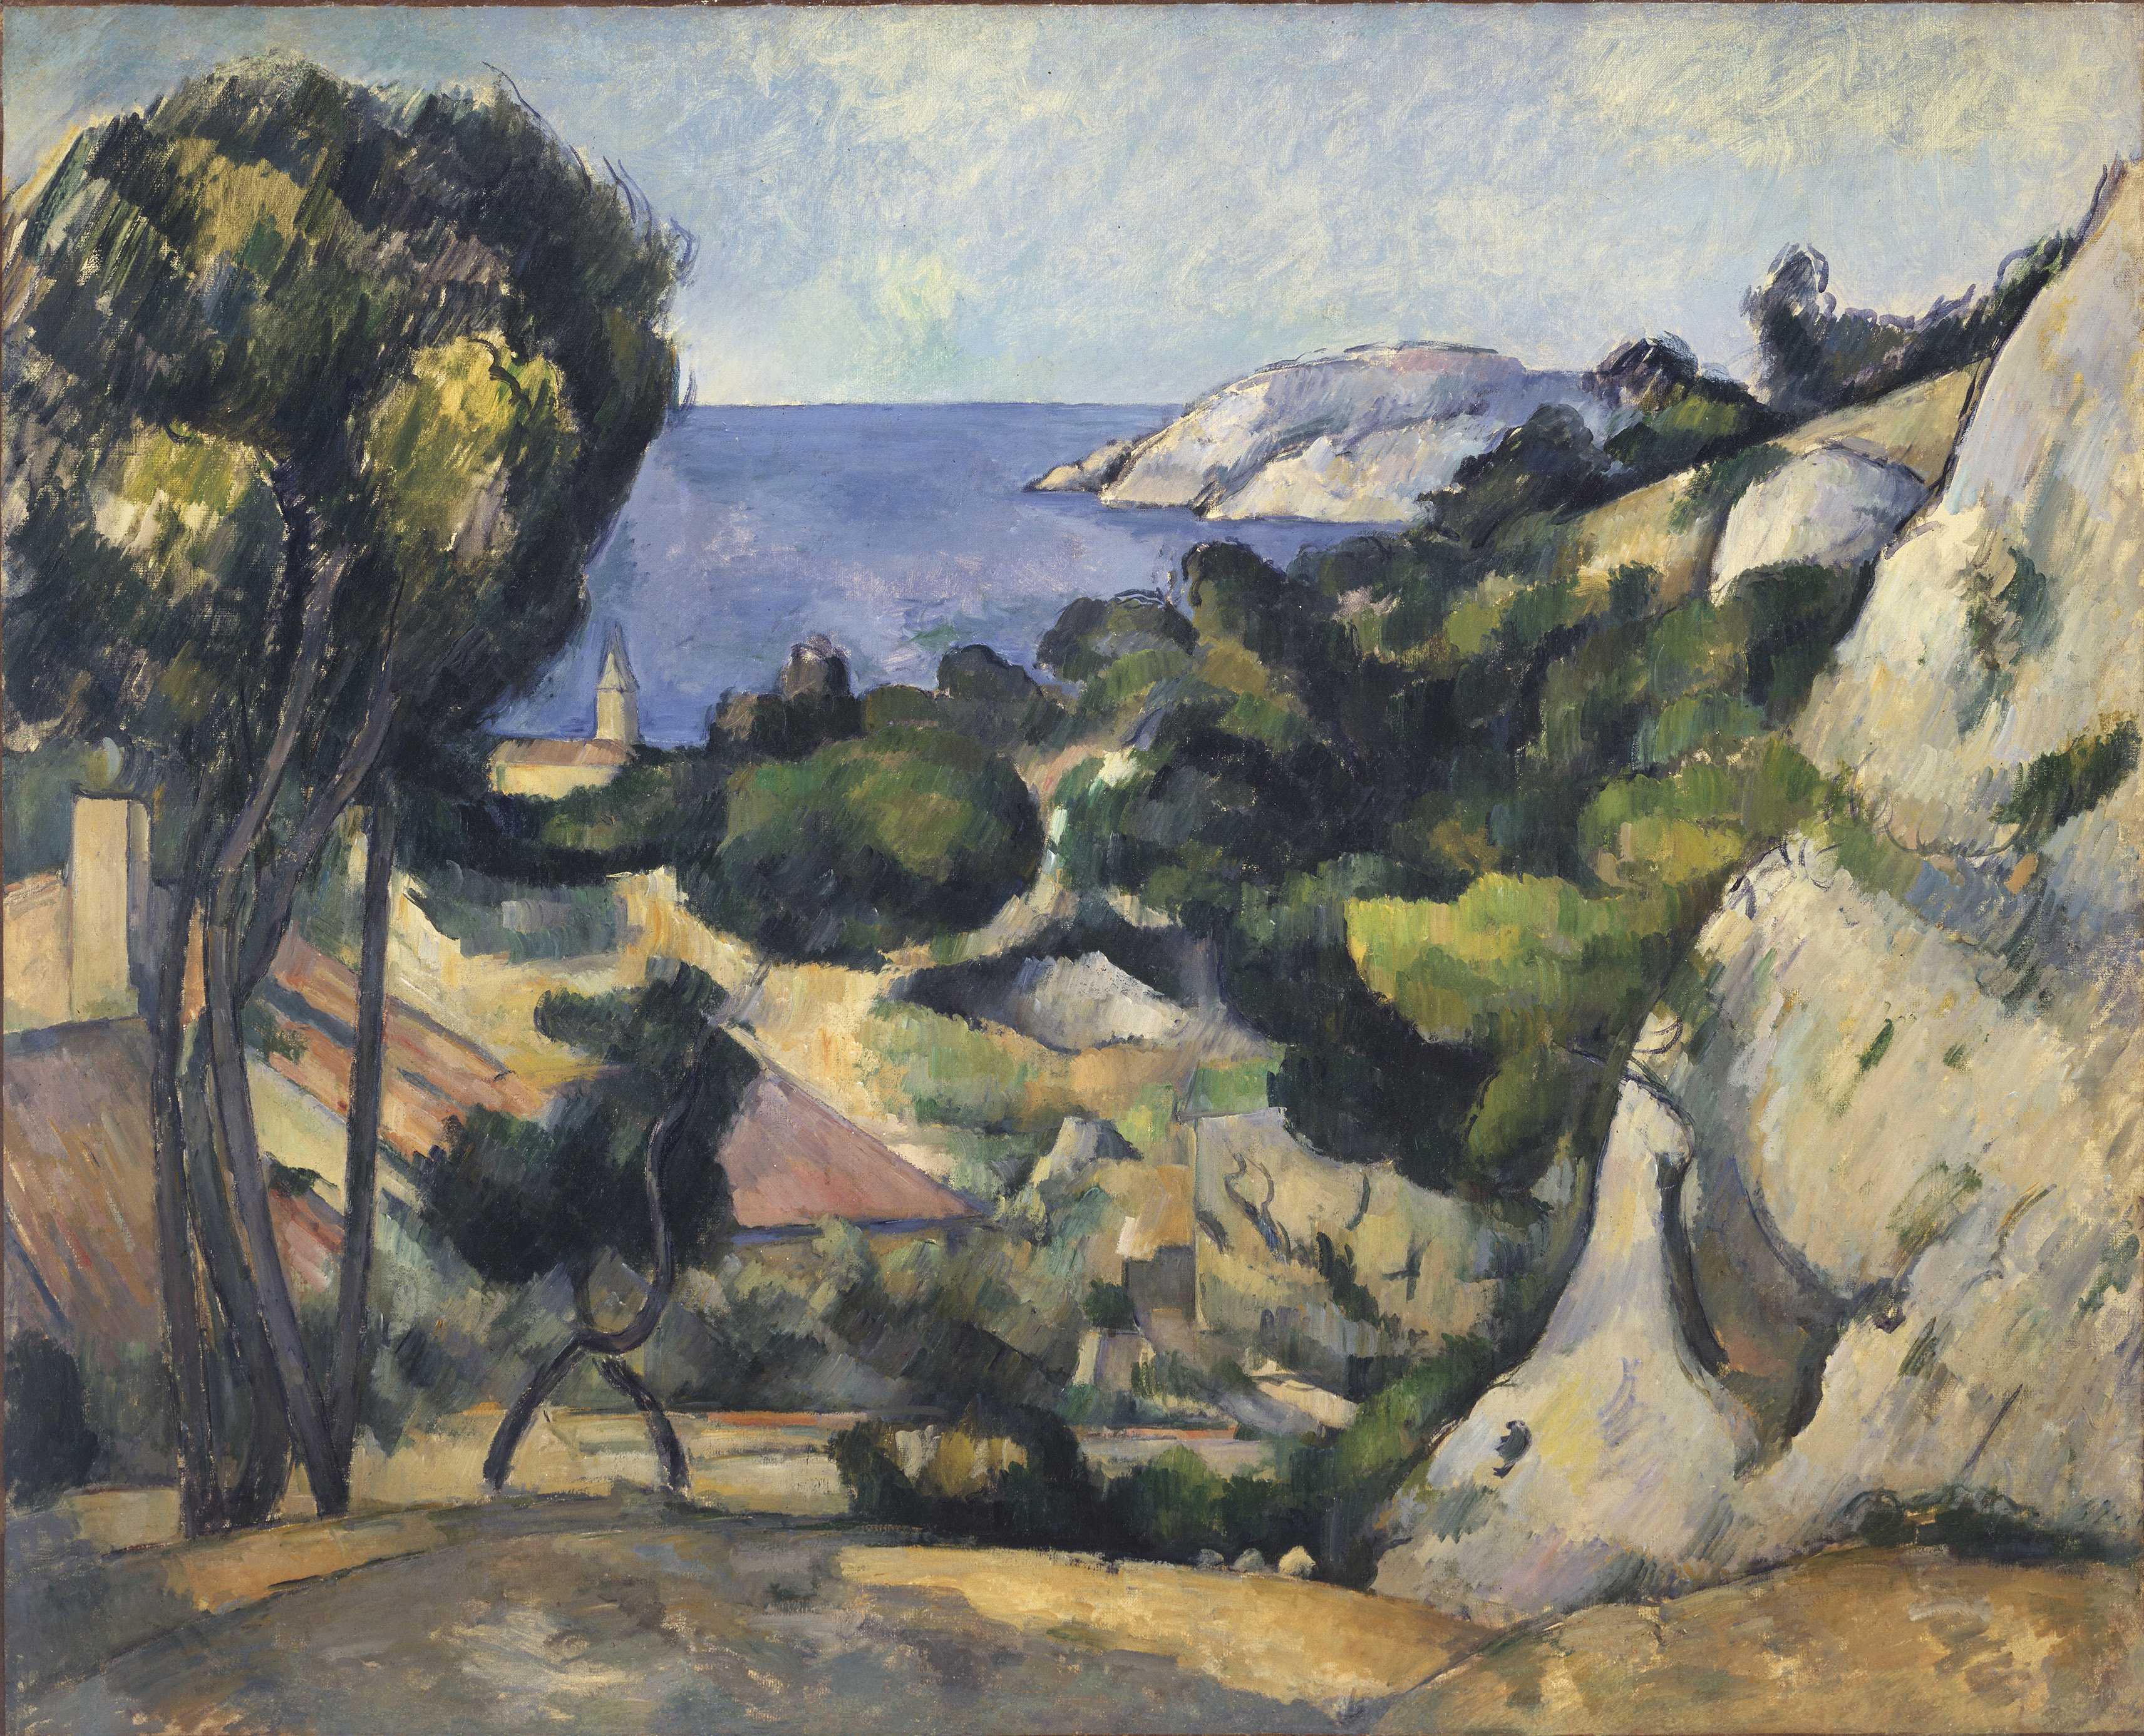 Paul Cézanne, L'Estaque, 1879-83. Oil on canvas, 80.3 x 99.4 cm. The Museum of Modern Art, New York. The William S. Paley Collection, 1959. © 2019. Digital image, The Museum of Modern Art, New York/Scala, Florence